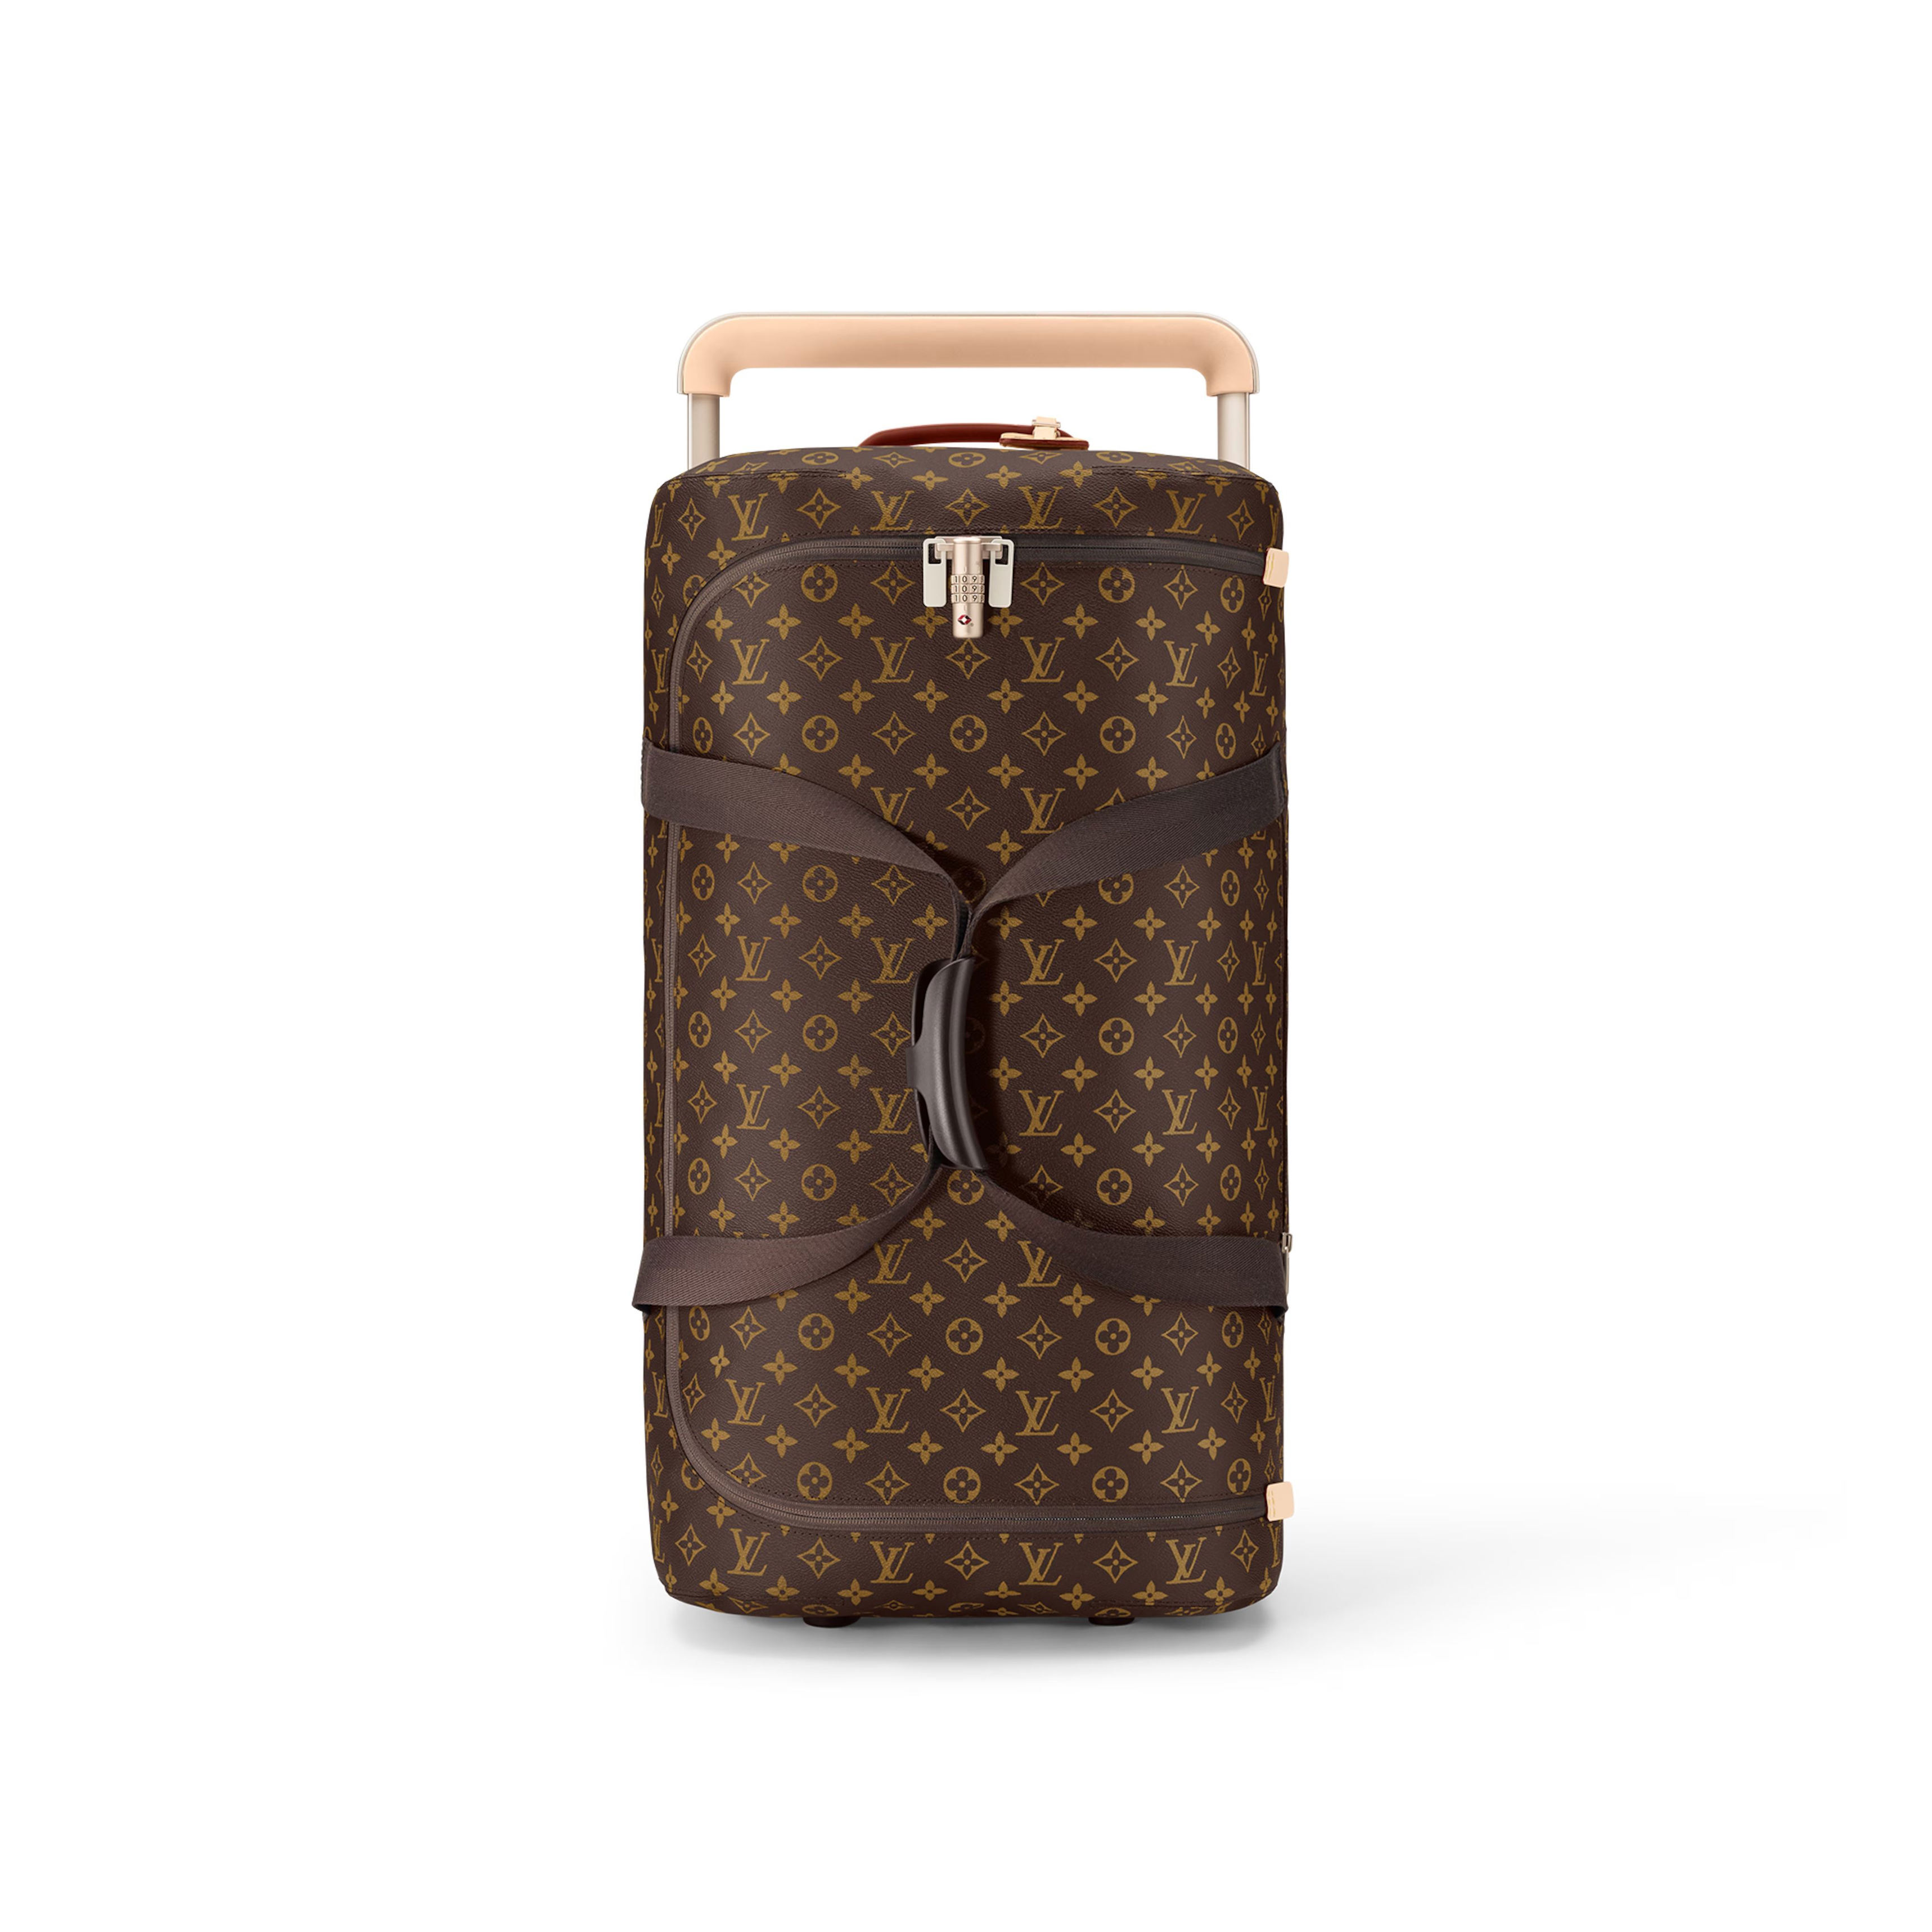 <p><strong>$3450.00</strong></p><p><a href="https://us.louisvuitton.com/eng-us/products/horizon-soft-65-monogram-canvas-nvprod1250236v/M20111">Shop Now</a></p><p>This roller duffle is a game changer for the chronic overpacker who is constantly weighed down by their Keepall. </p><p><strong>Dimensions: </strong>25.6" H x 11.8" W x 13.8" L</p><p><strong>Materials: </strong>Monogram-coated canvas with mesh lining; leather and plastic trim </p>